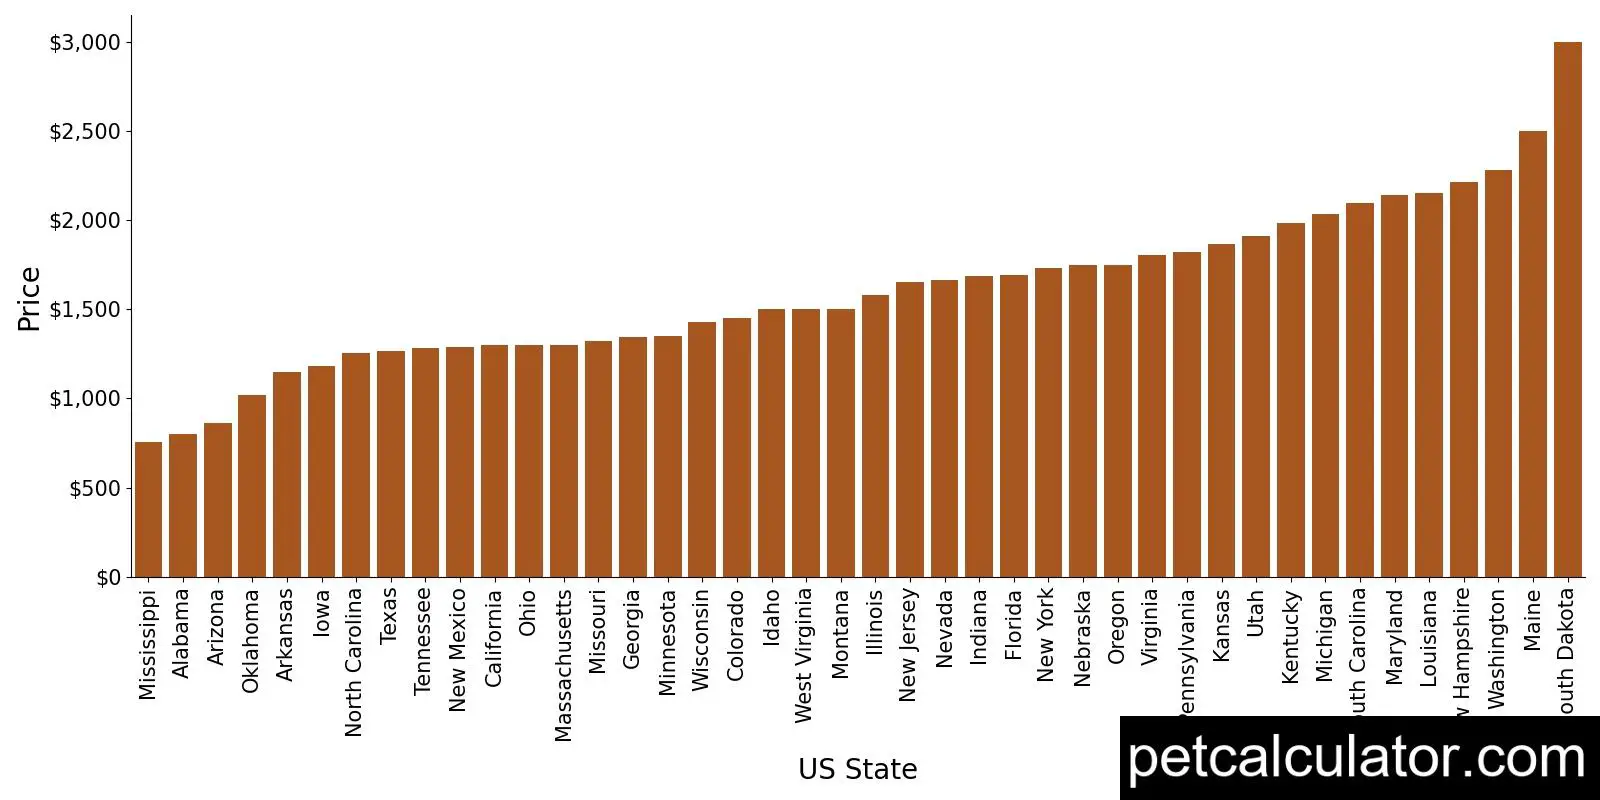 Price of Boxer by US State 